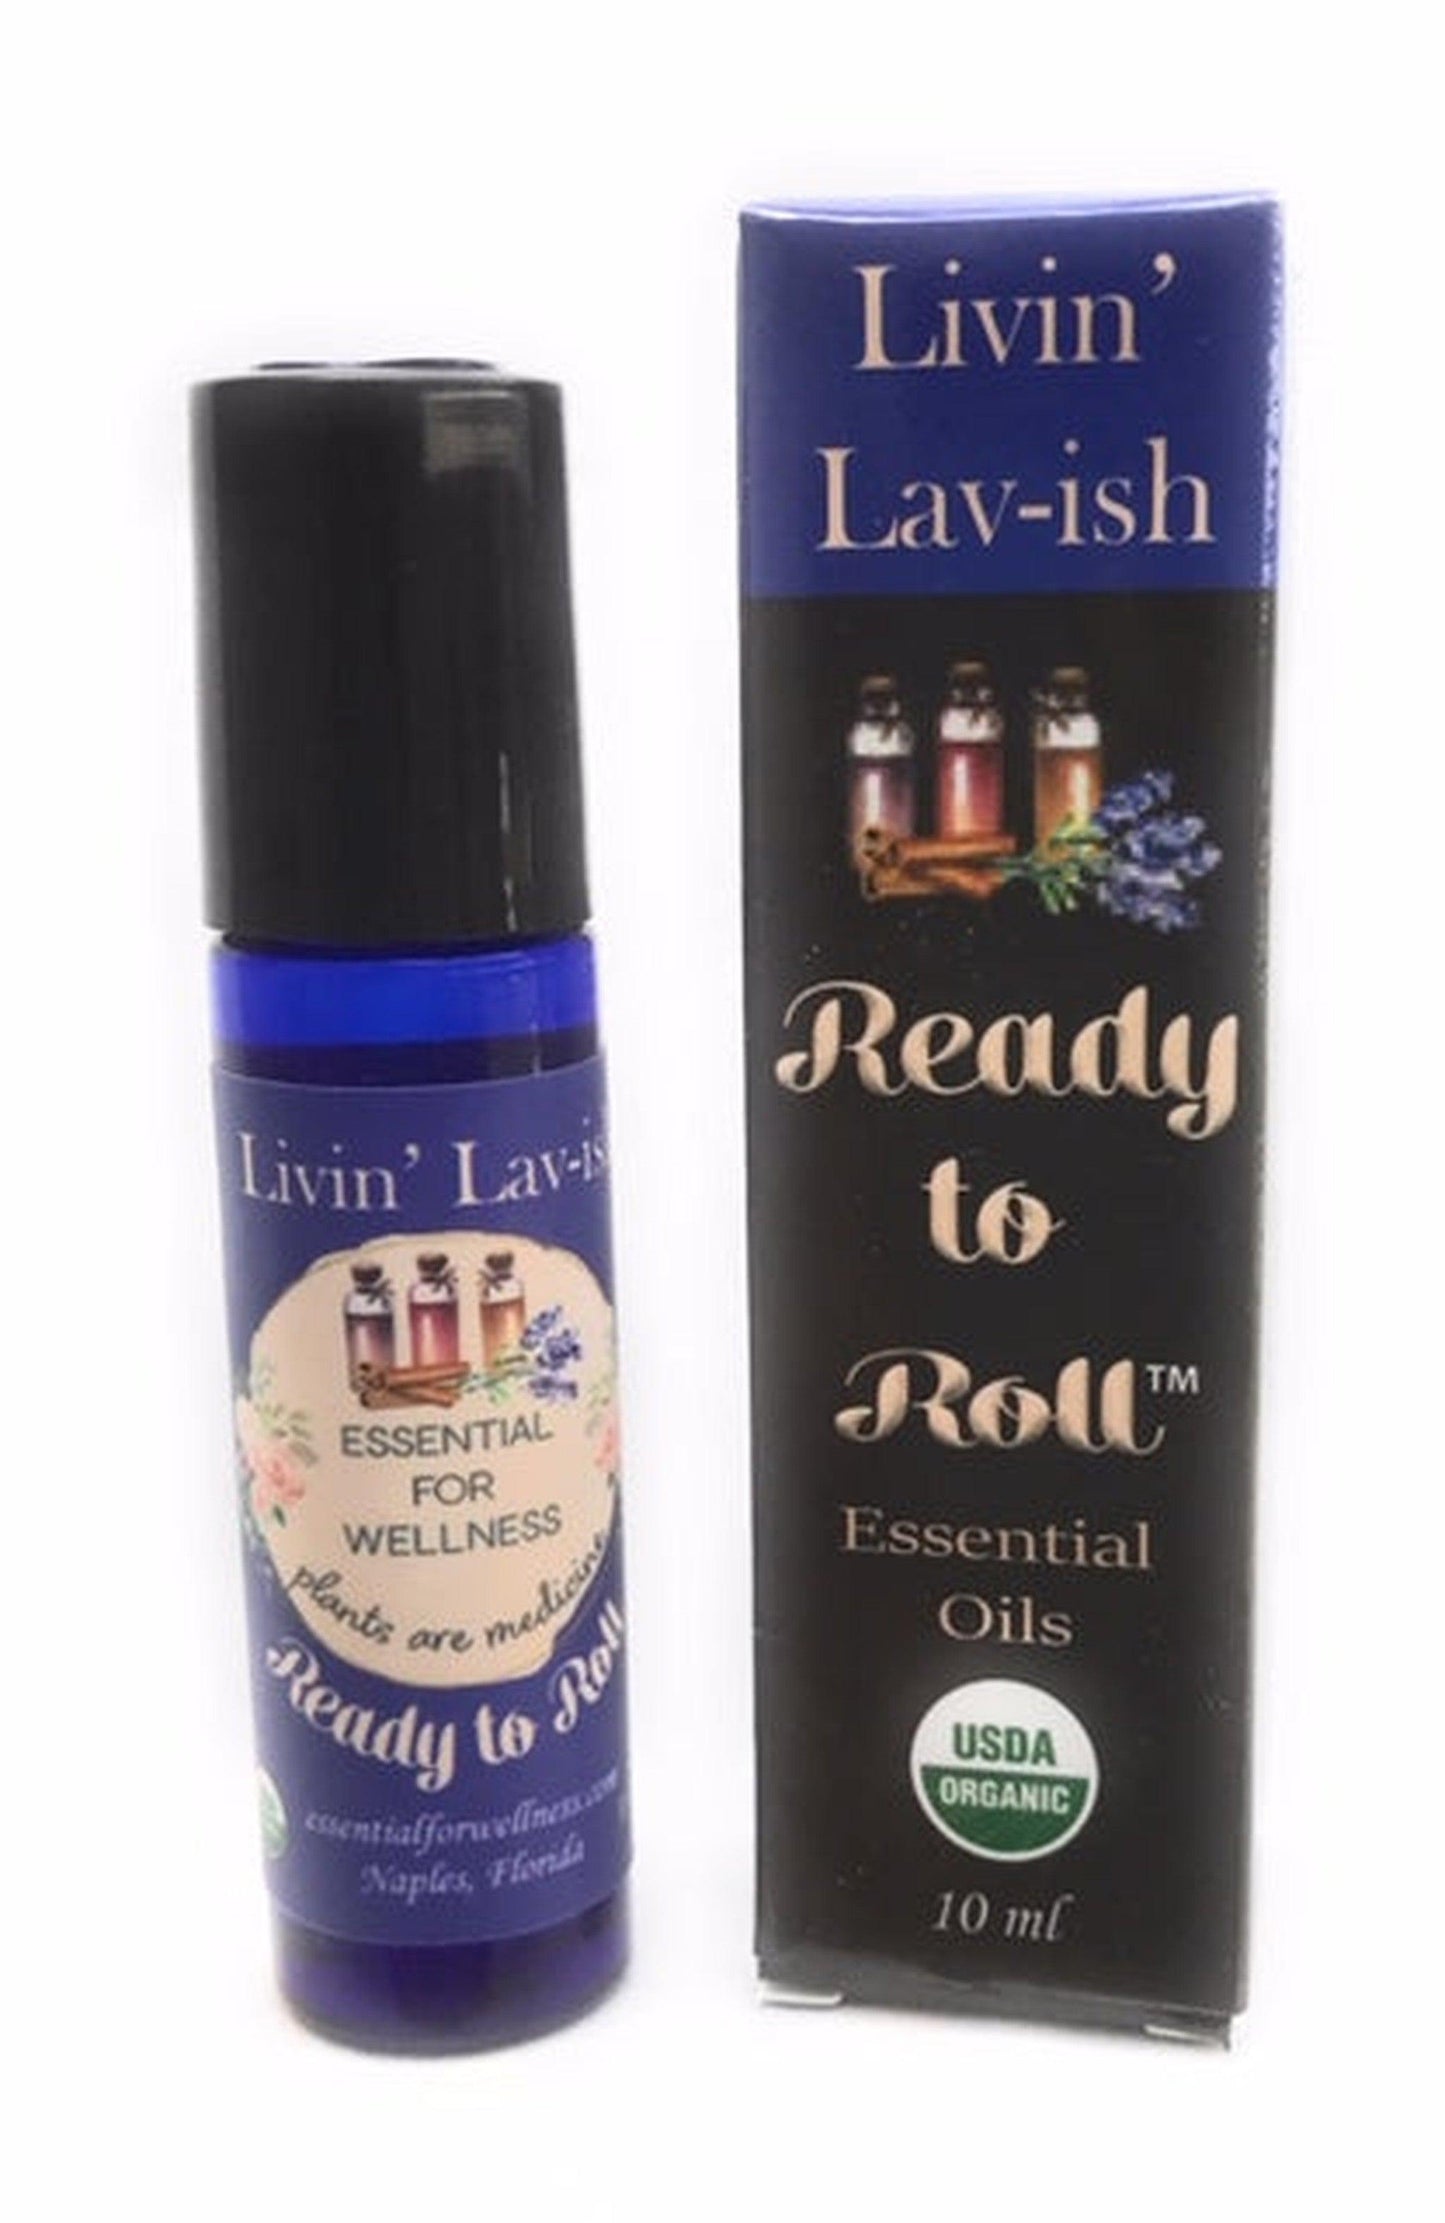 Ready to Roll® Livin' Lav-ish Lavender Organic Essential Oil Blend